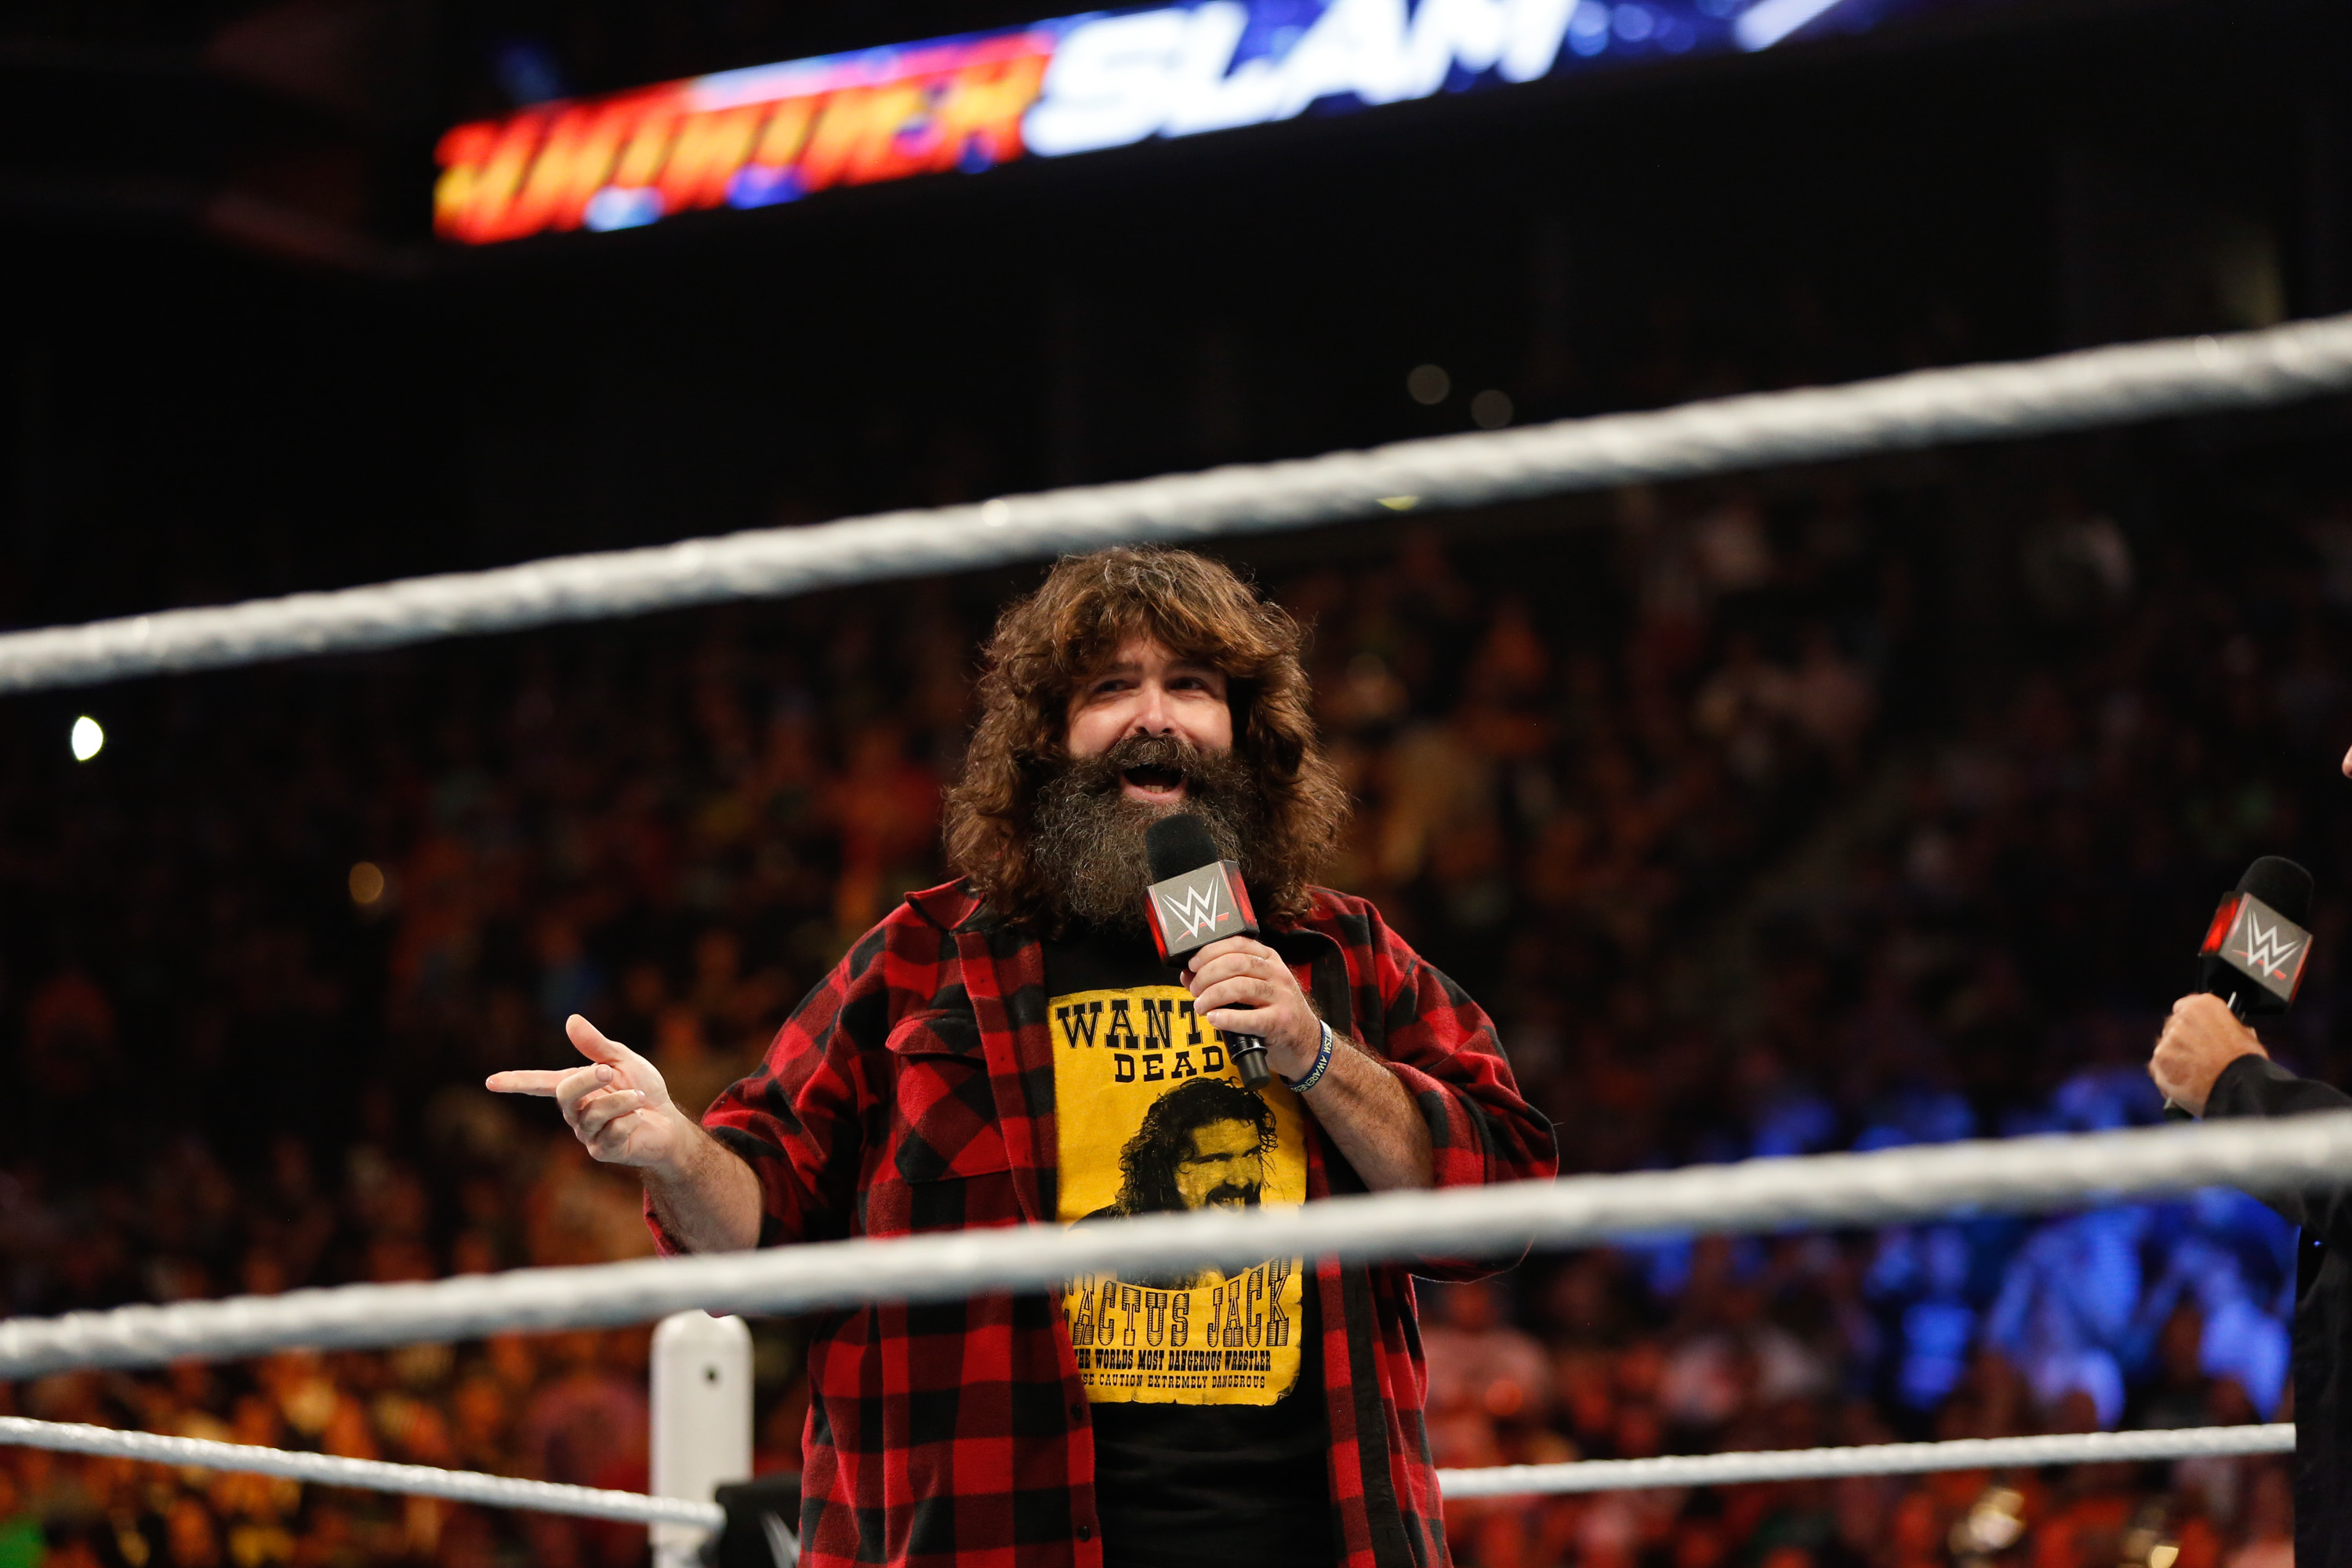 Mick Foley greets the audience at WWE SummerSlam 2015 at Barclays Center of Brooklyn on August 23, 2015